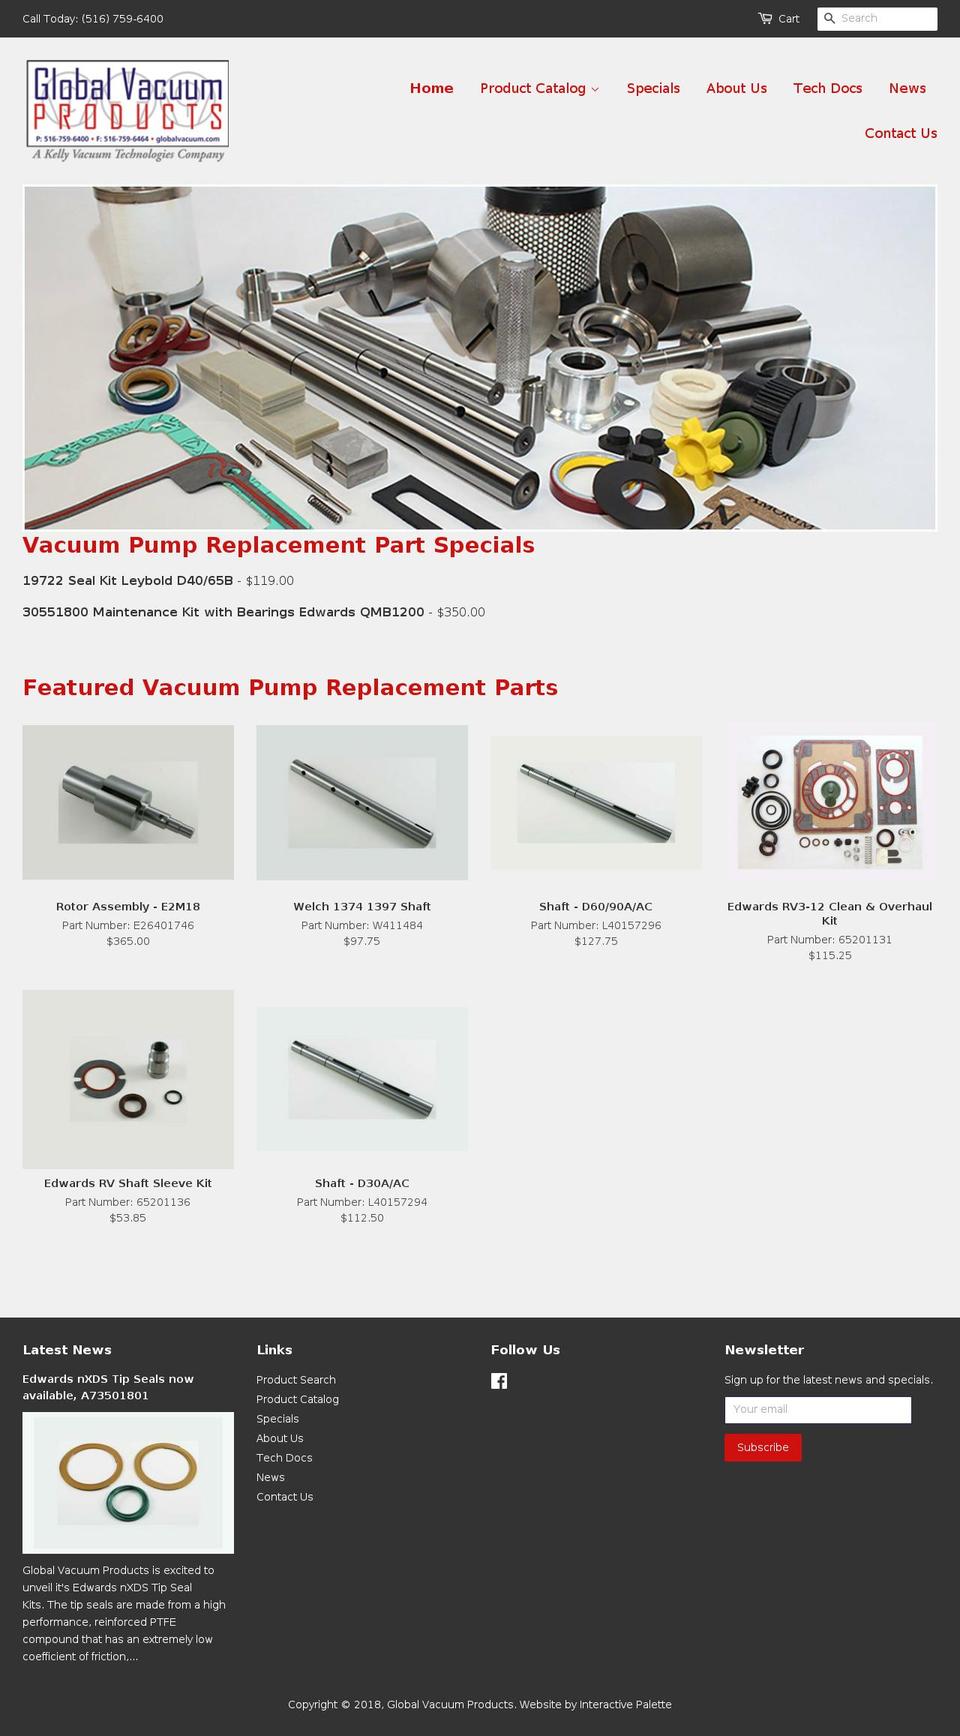 Global Vacuum Products Shopify theme site example kellyvacuum.com